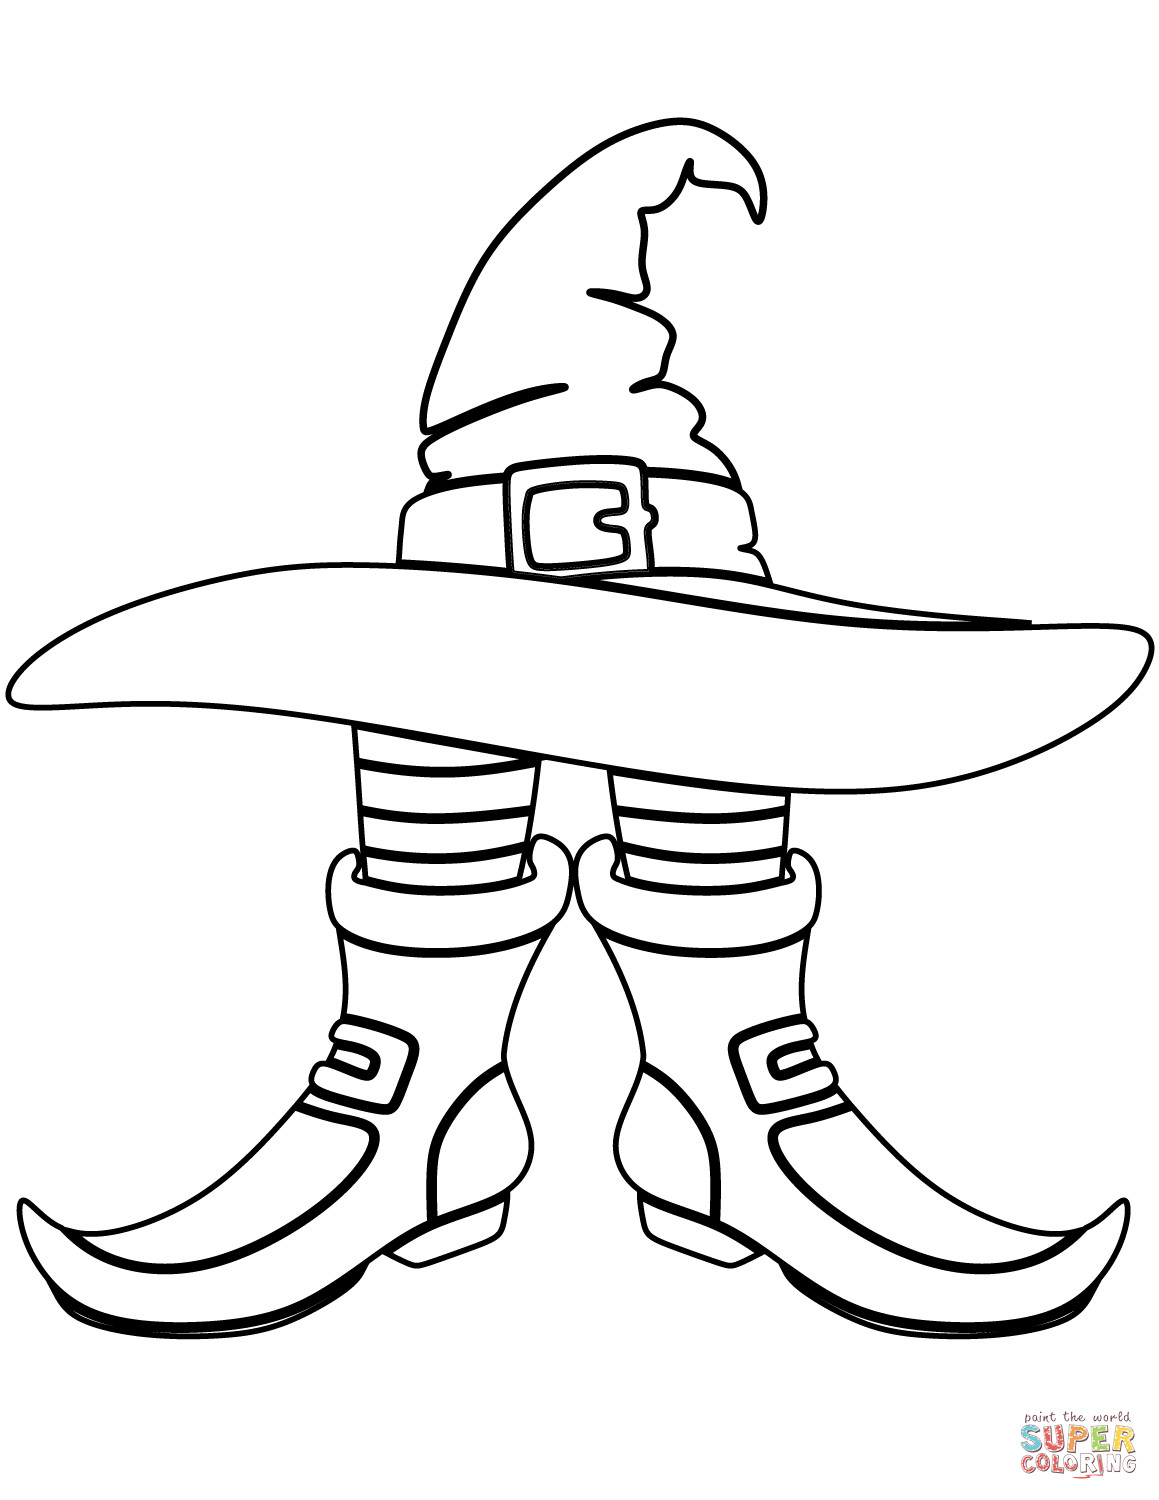 Halloween Witch Hat Coloring Pages at GetColorings.com | Free printable ...